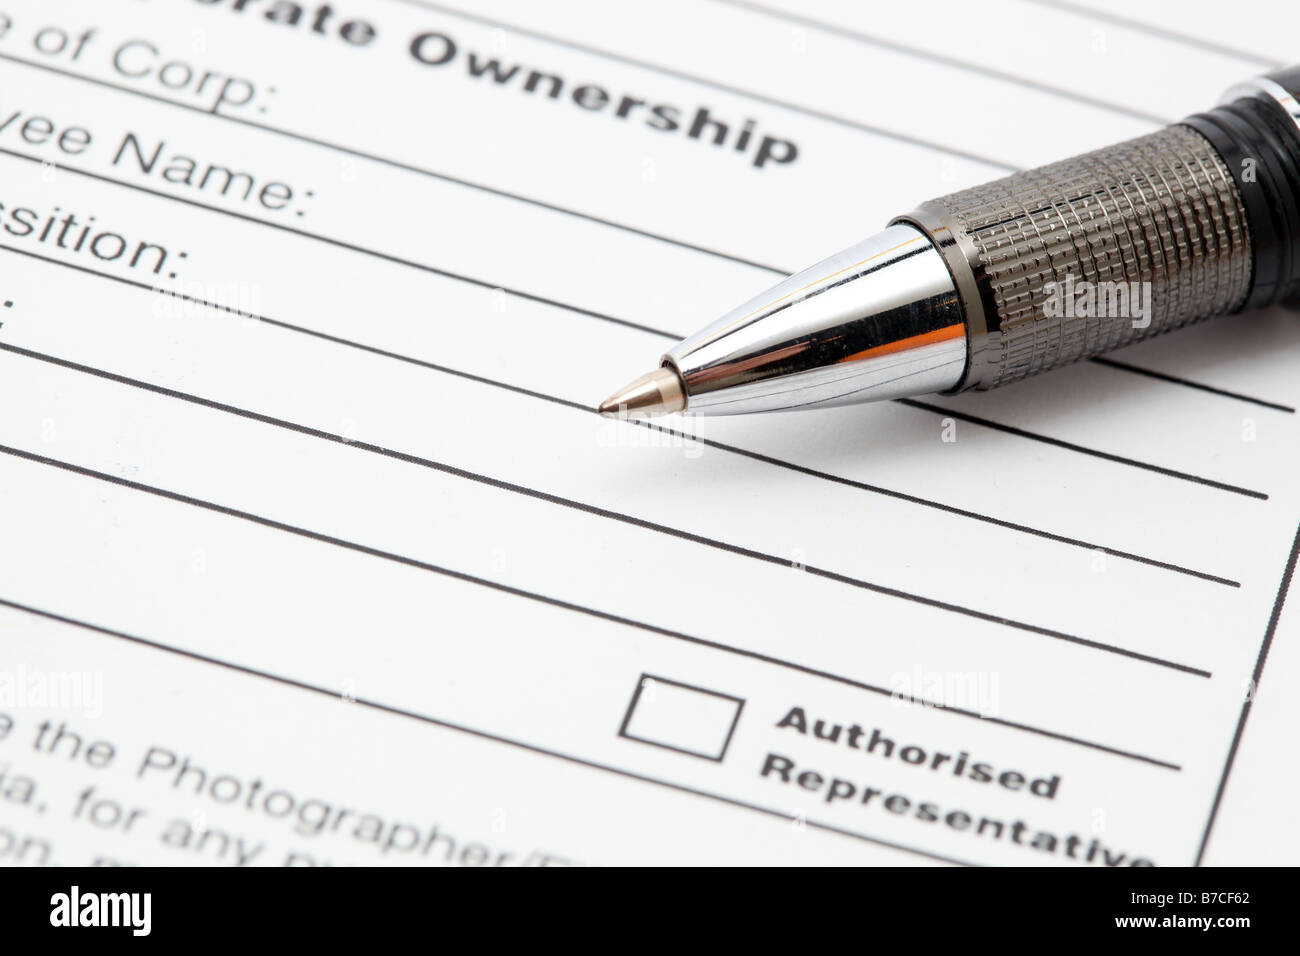 corporate contract release detail with ballpen Stock Photo